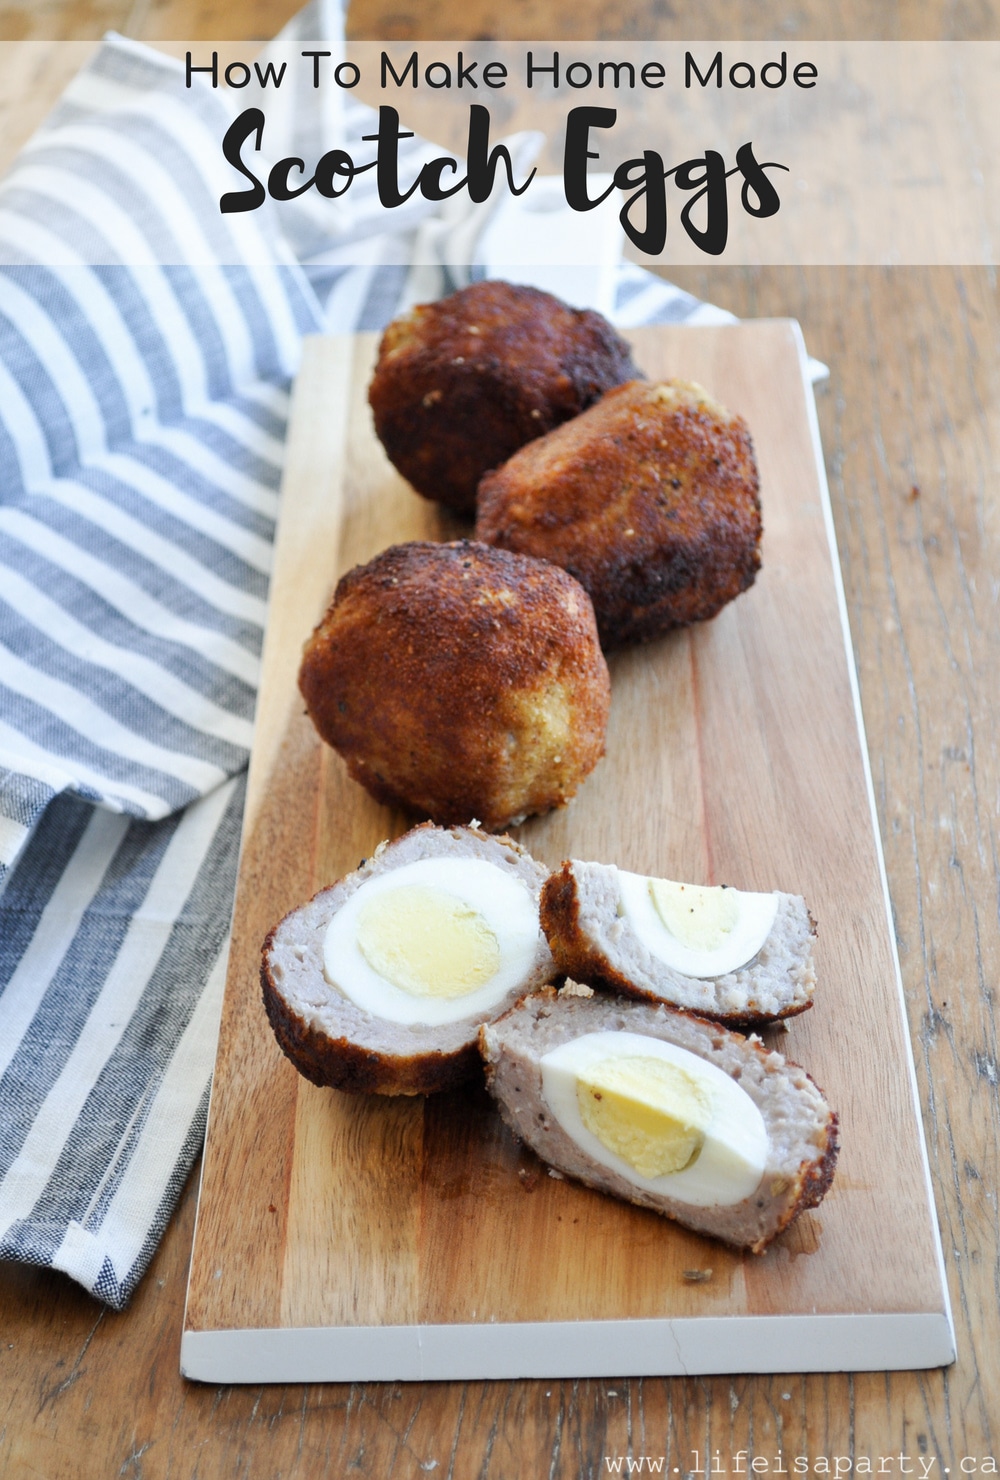 Scotch Eggs: How to make home made Scotch Eggs, the perfect British snack or picnic food. Hard boiled eggs wrapped in sausage and breaded.